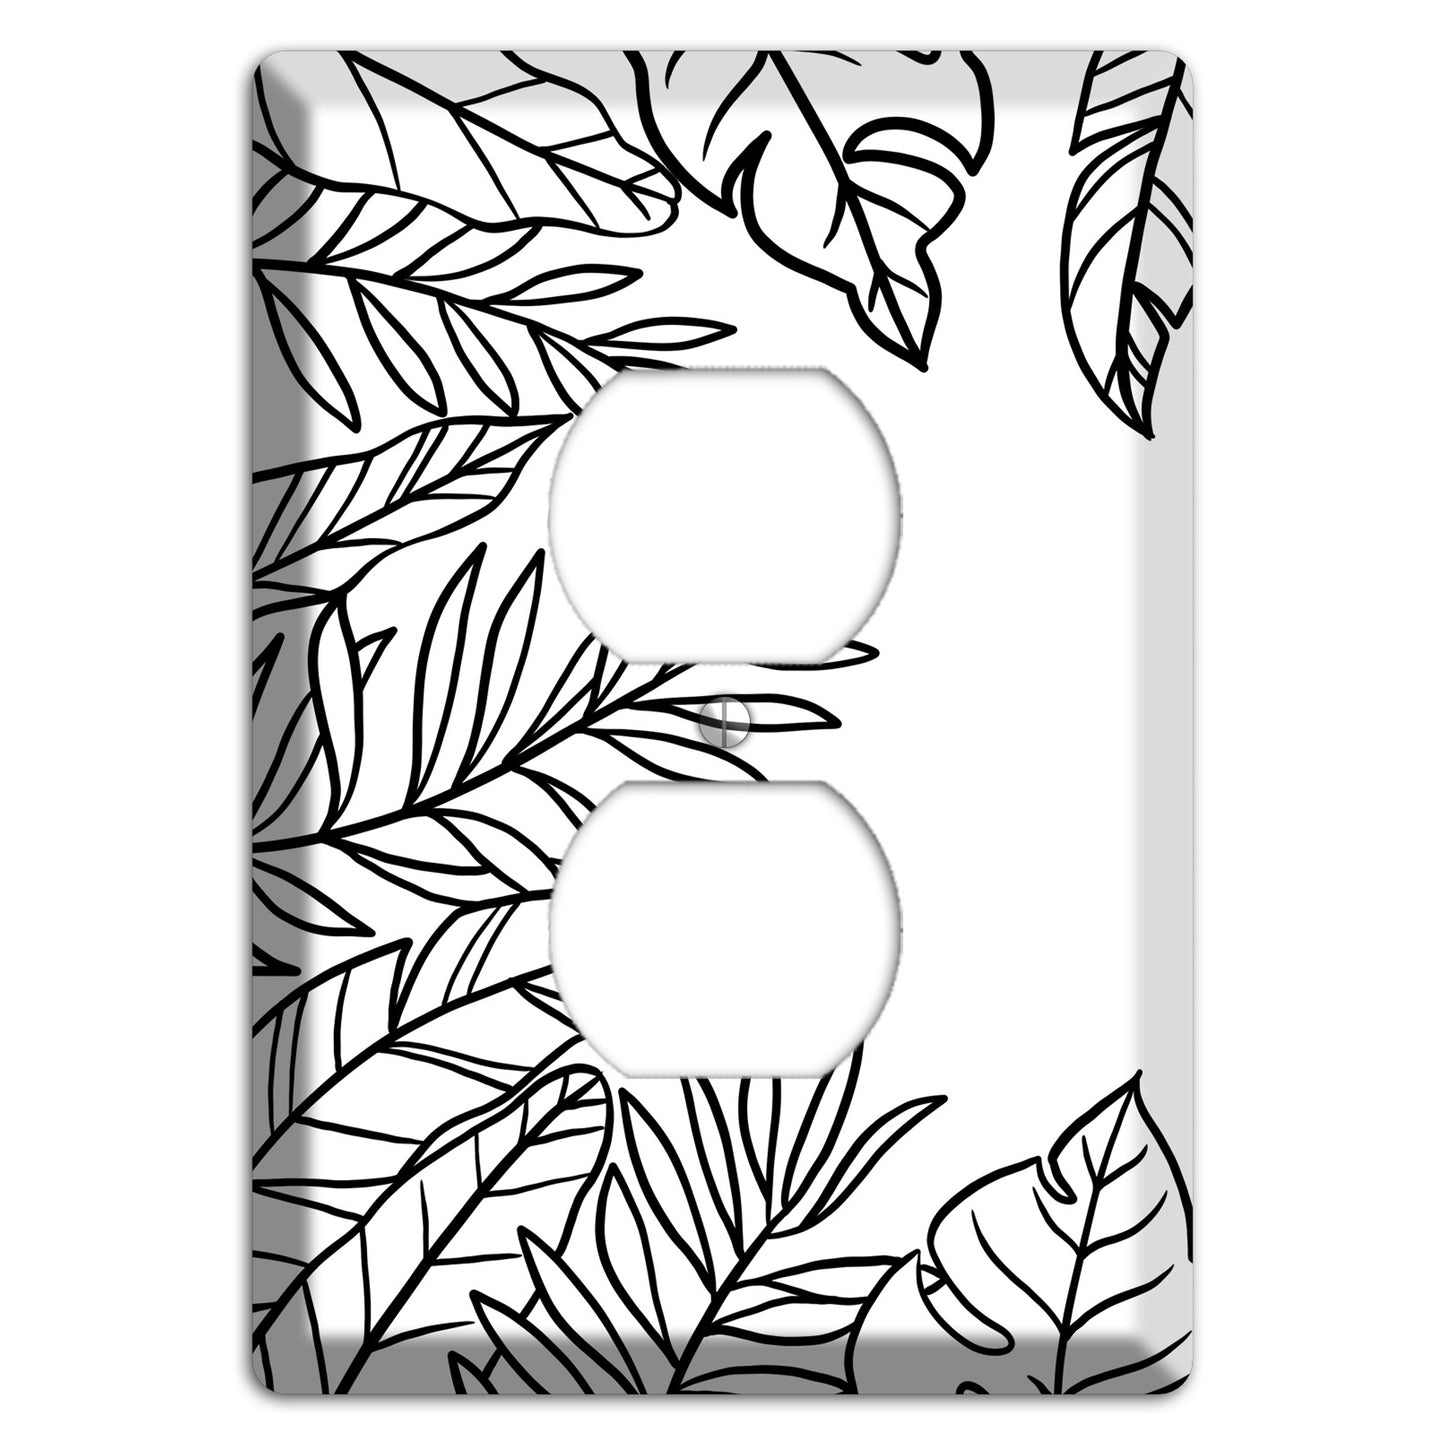 Hand-Drawn Leaves 5 Duplex Outlet Wallplate